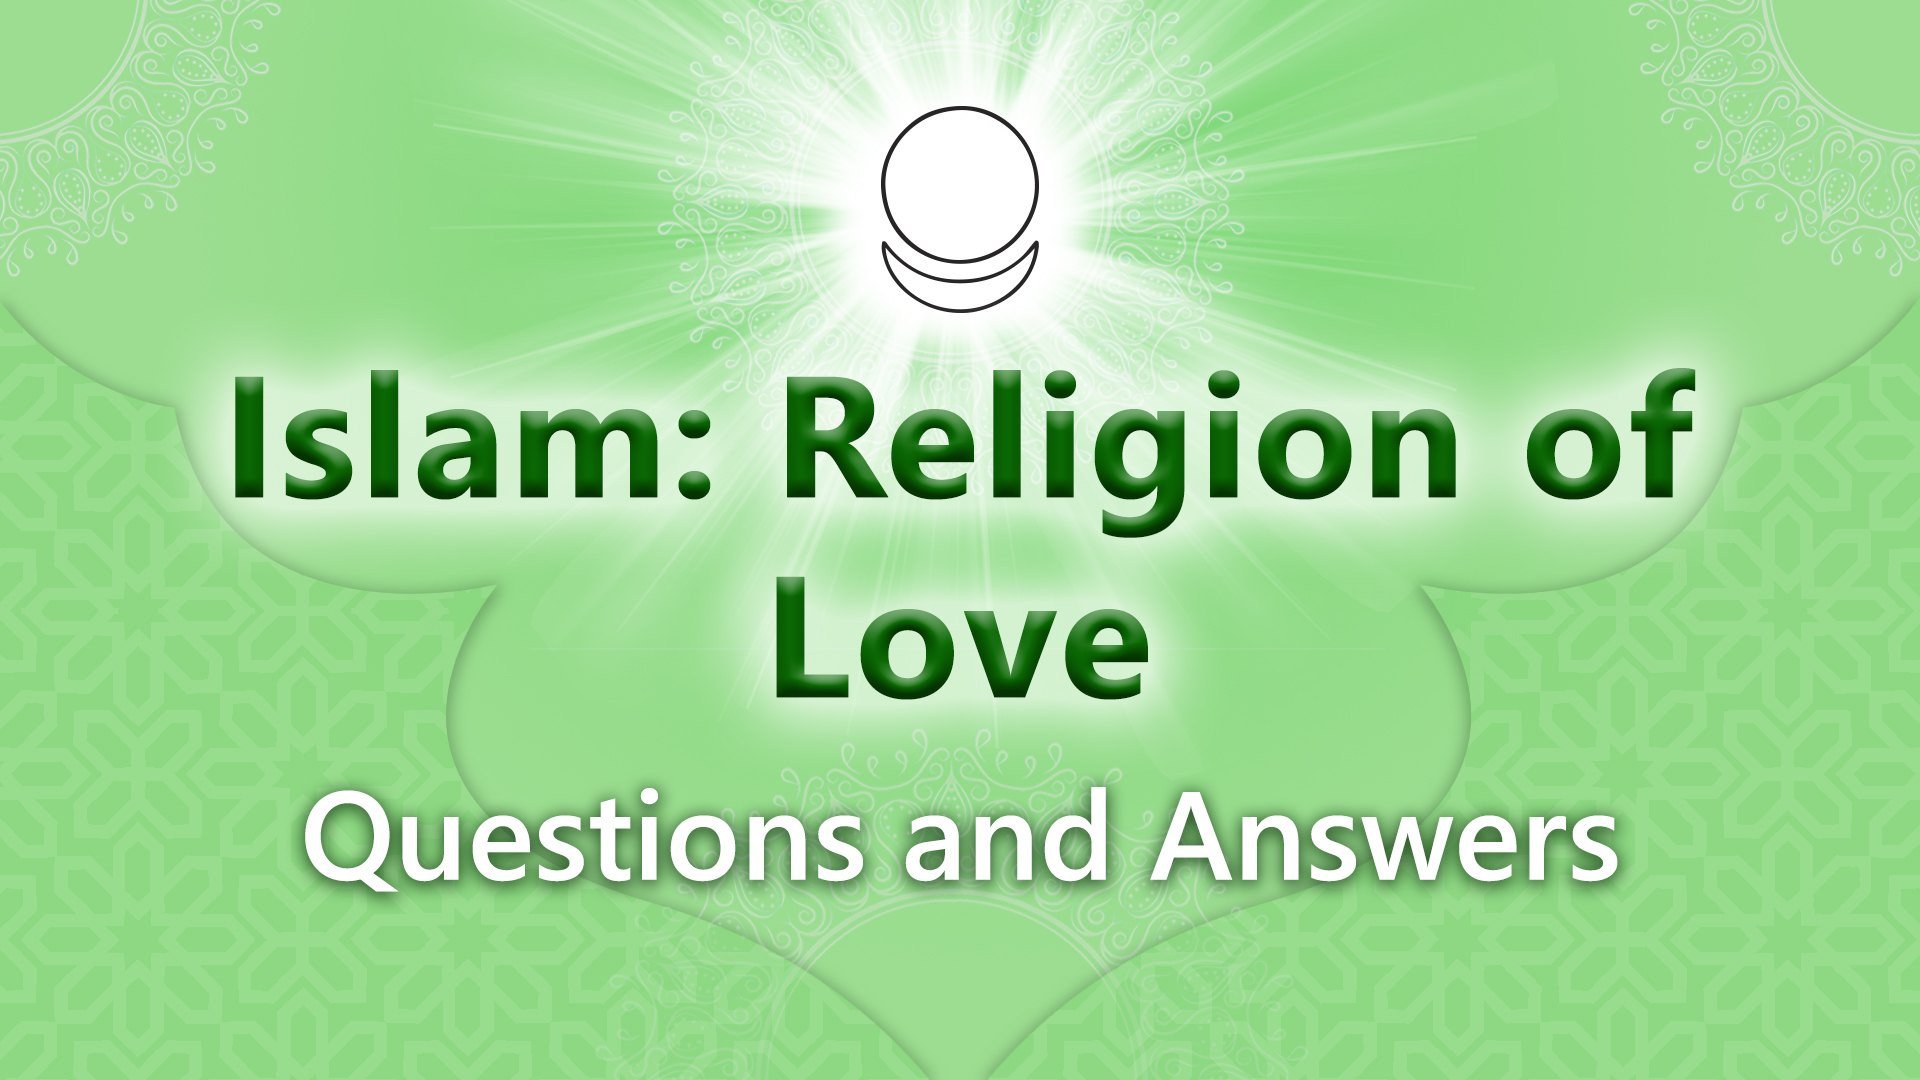 Islam: Religion of Love. Questions and Answers. Episode 4